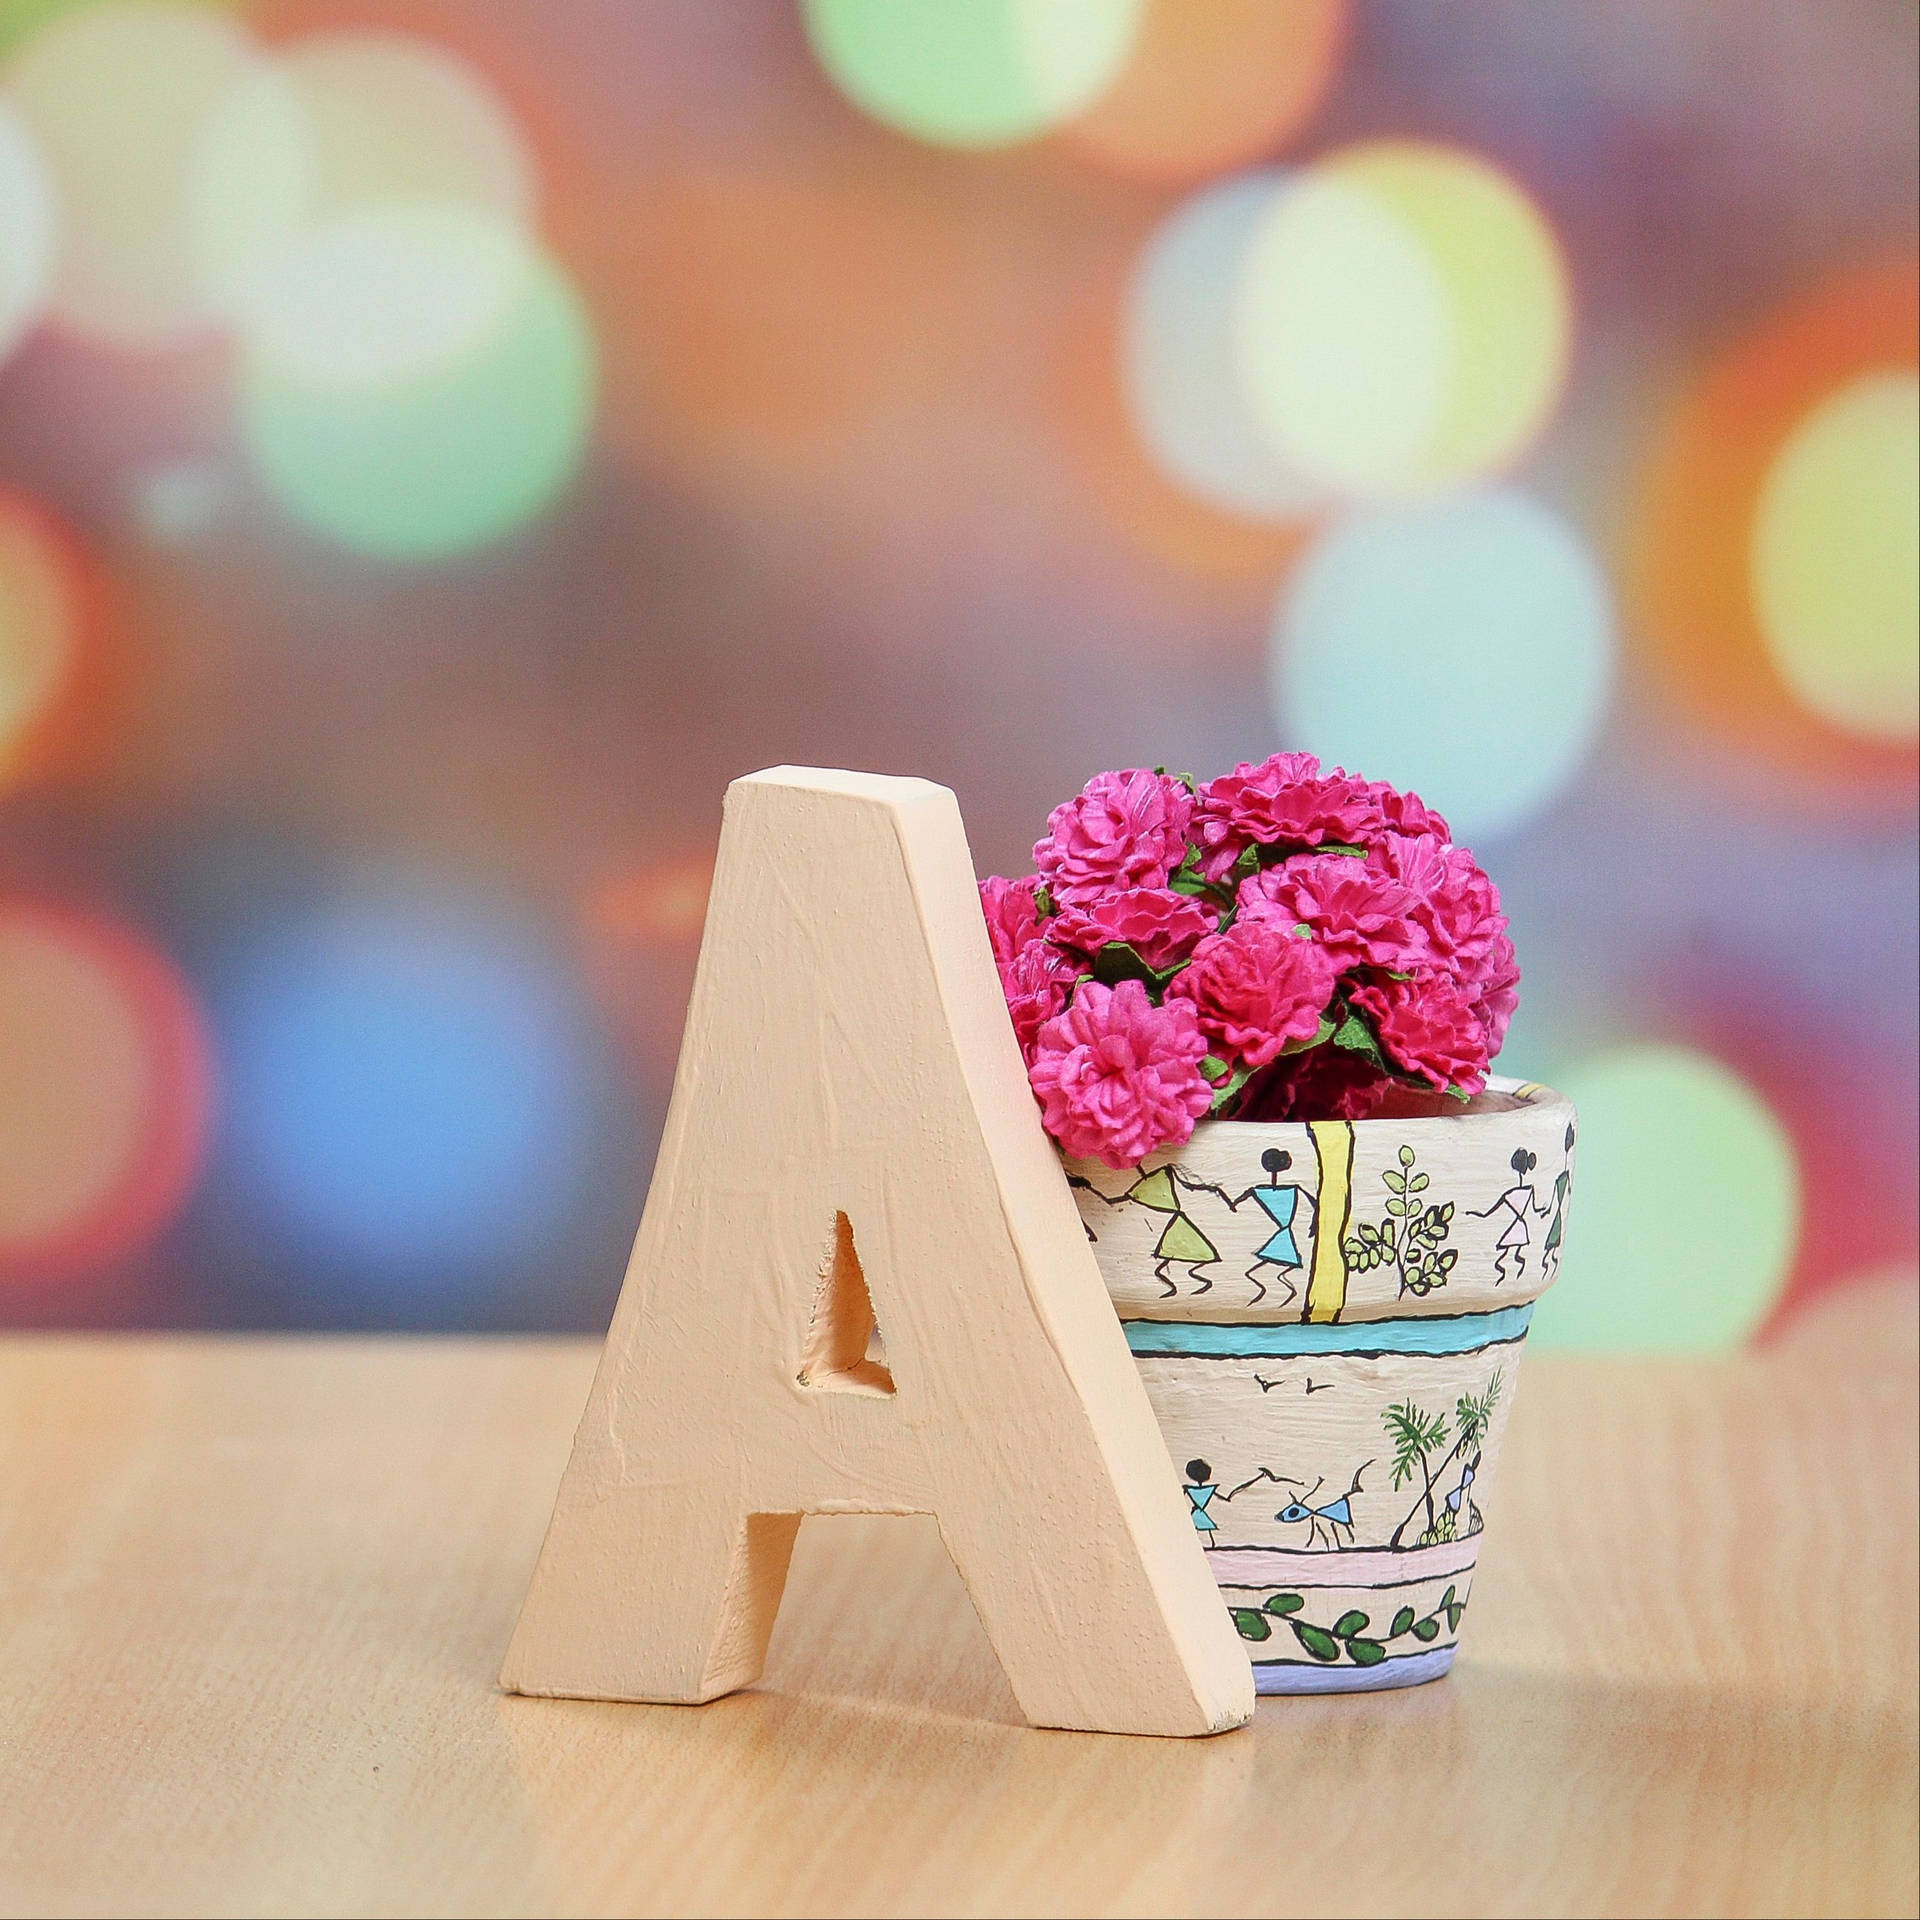 Capital Alphabet Letter A Leaning On Vase Picture